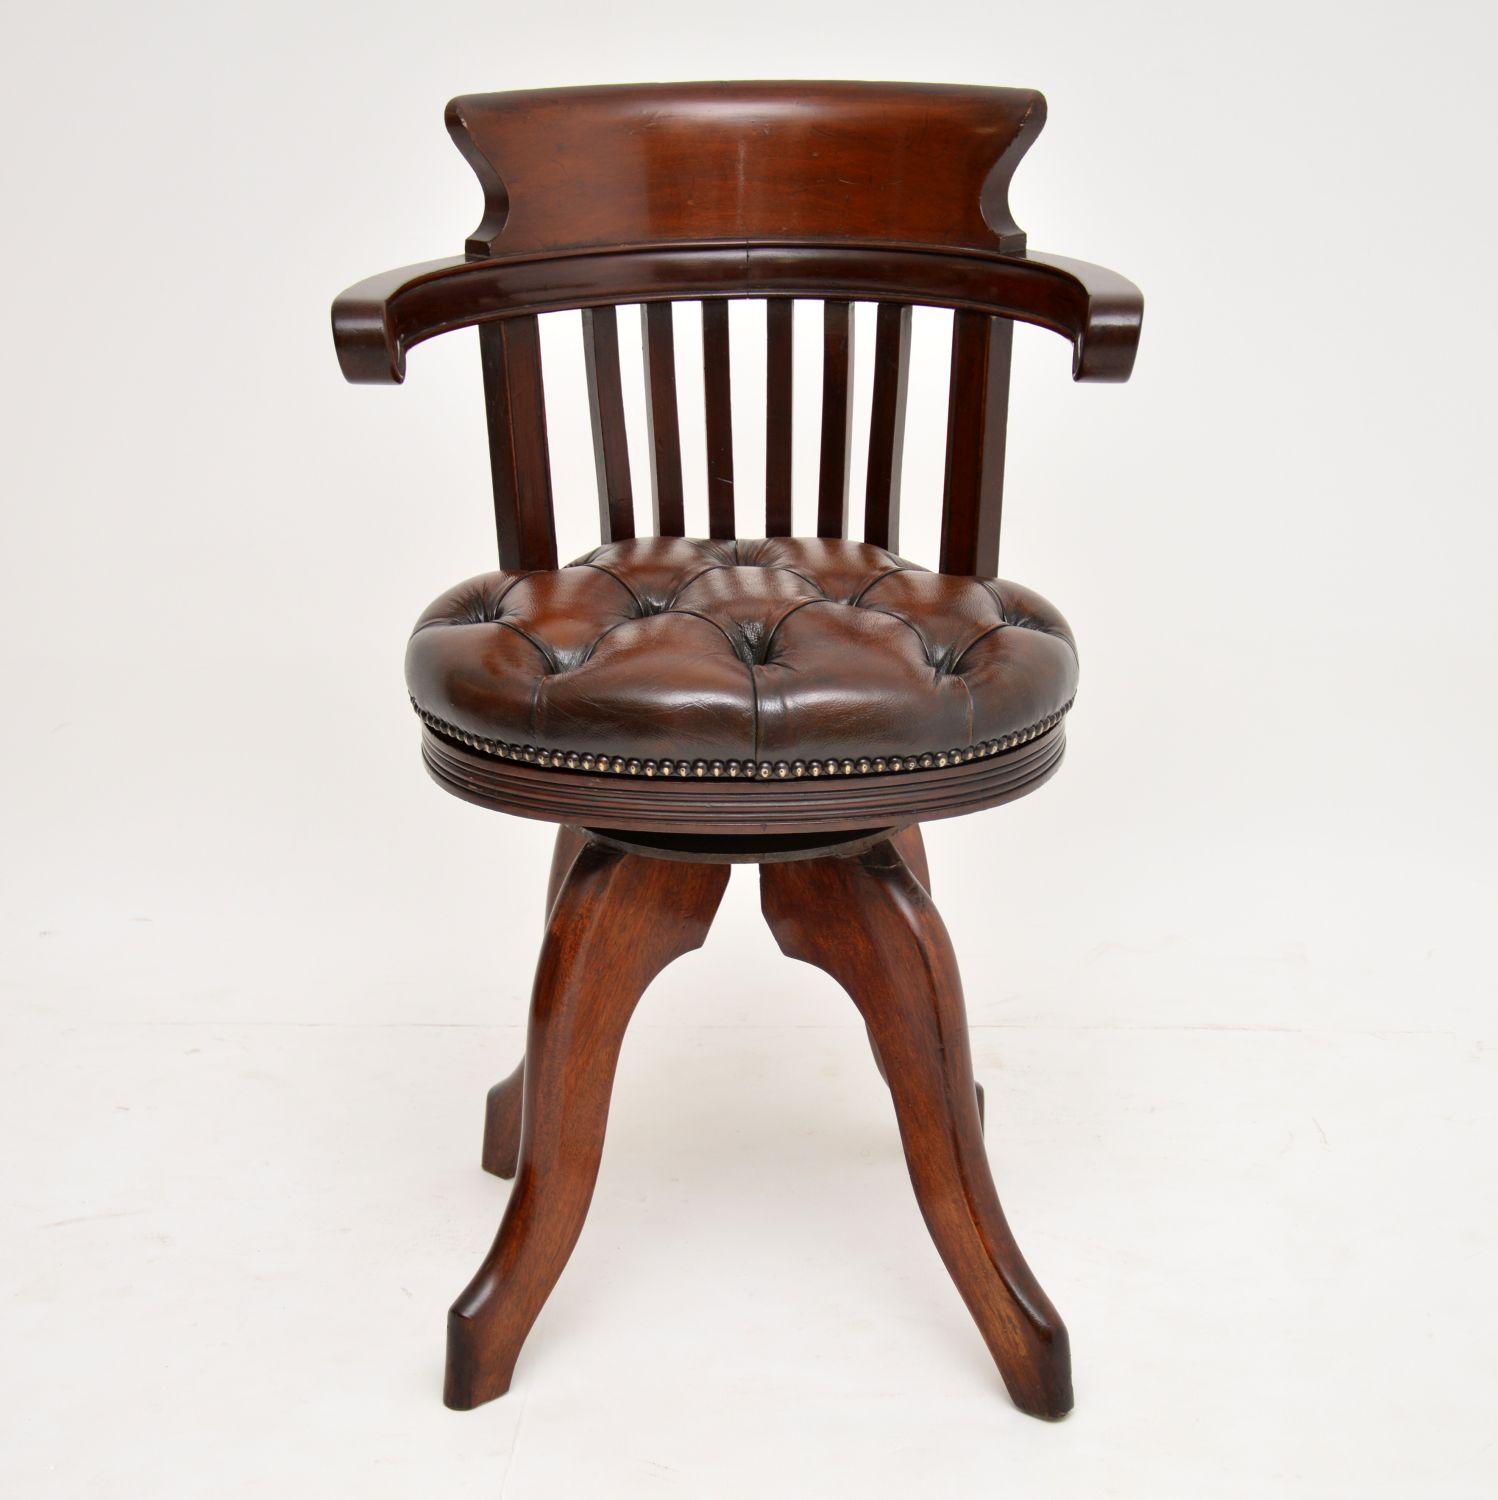 This antique solid mahogany desk chair has a very clever design & mechanism. It can sit extra close in the middle of a kneehole desk, because the arms are set back from the seat. What’s more, it has a very clever metal mechanism under the seat,